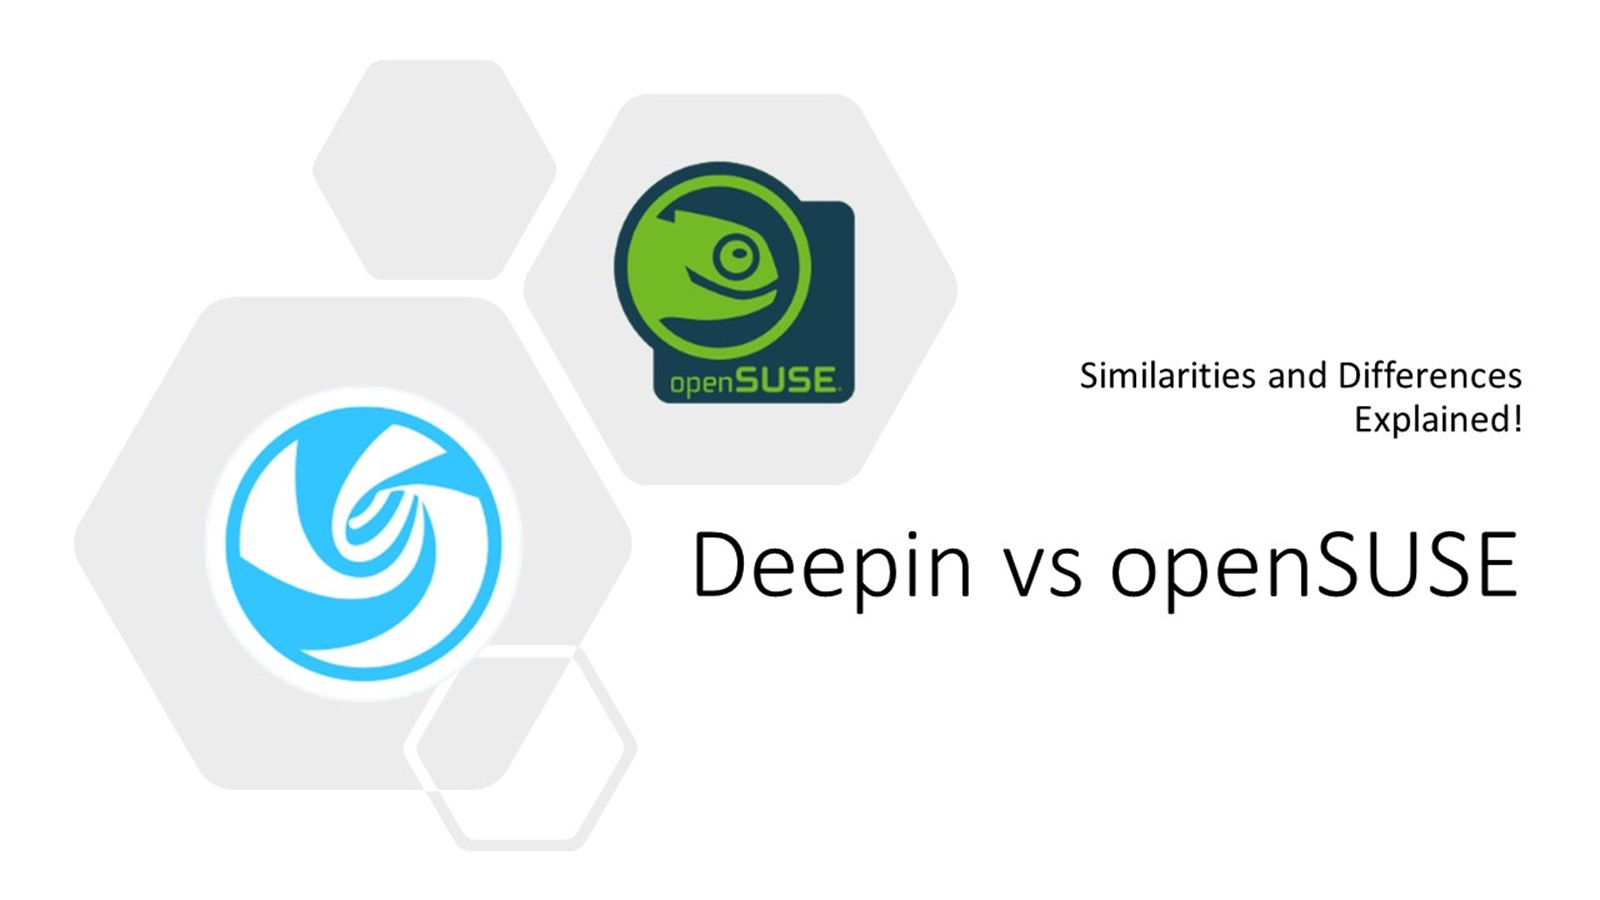 Deepin vs OpenSUSE: Similarities & Differences!